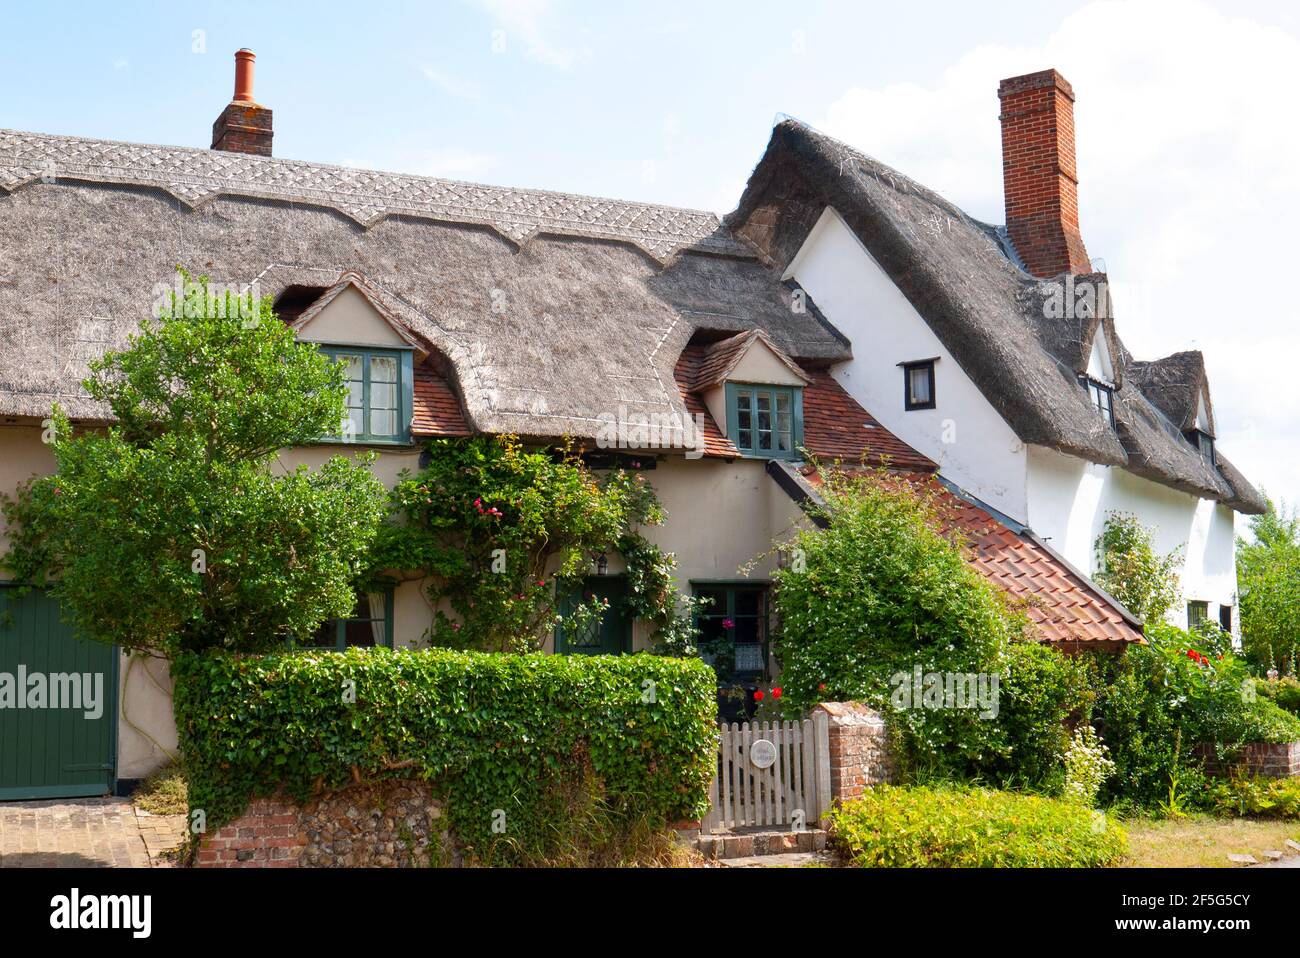 Thatched roof cottages in the village of Great Waldingfield, Suffolk, England Stock Photo